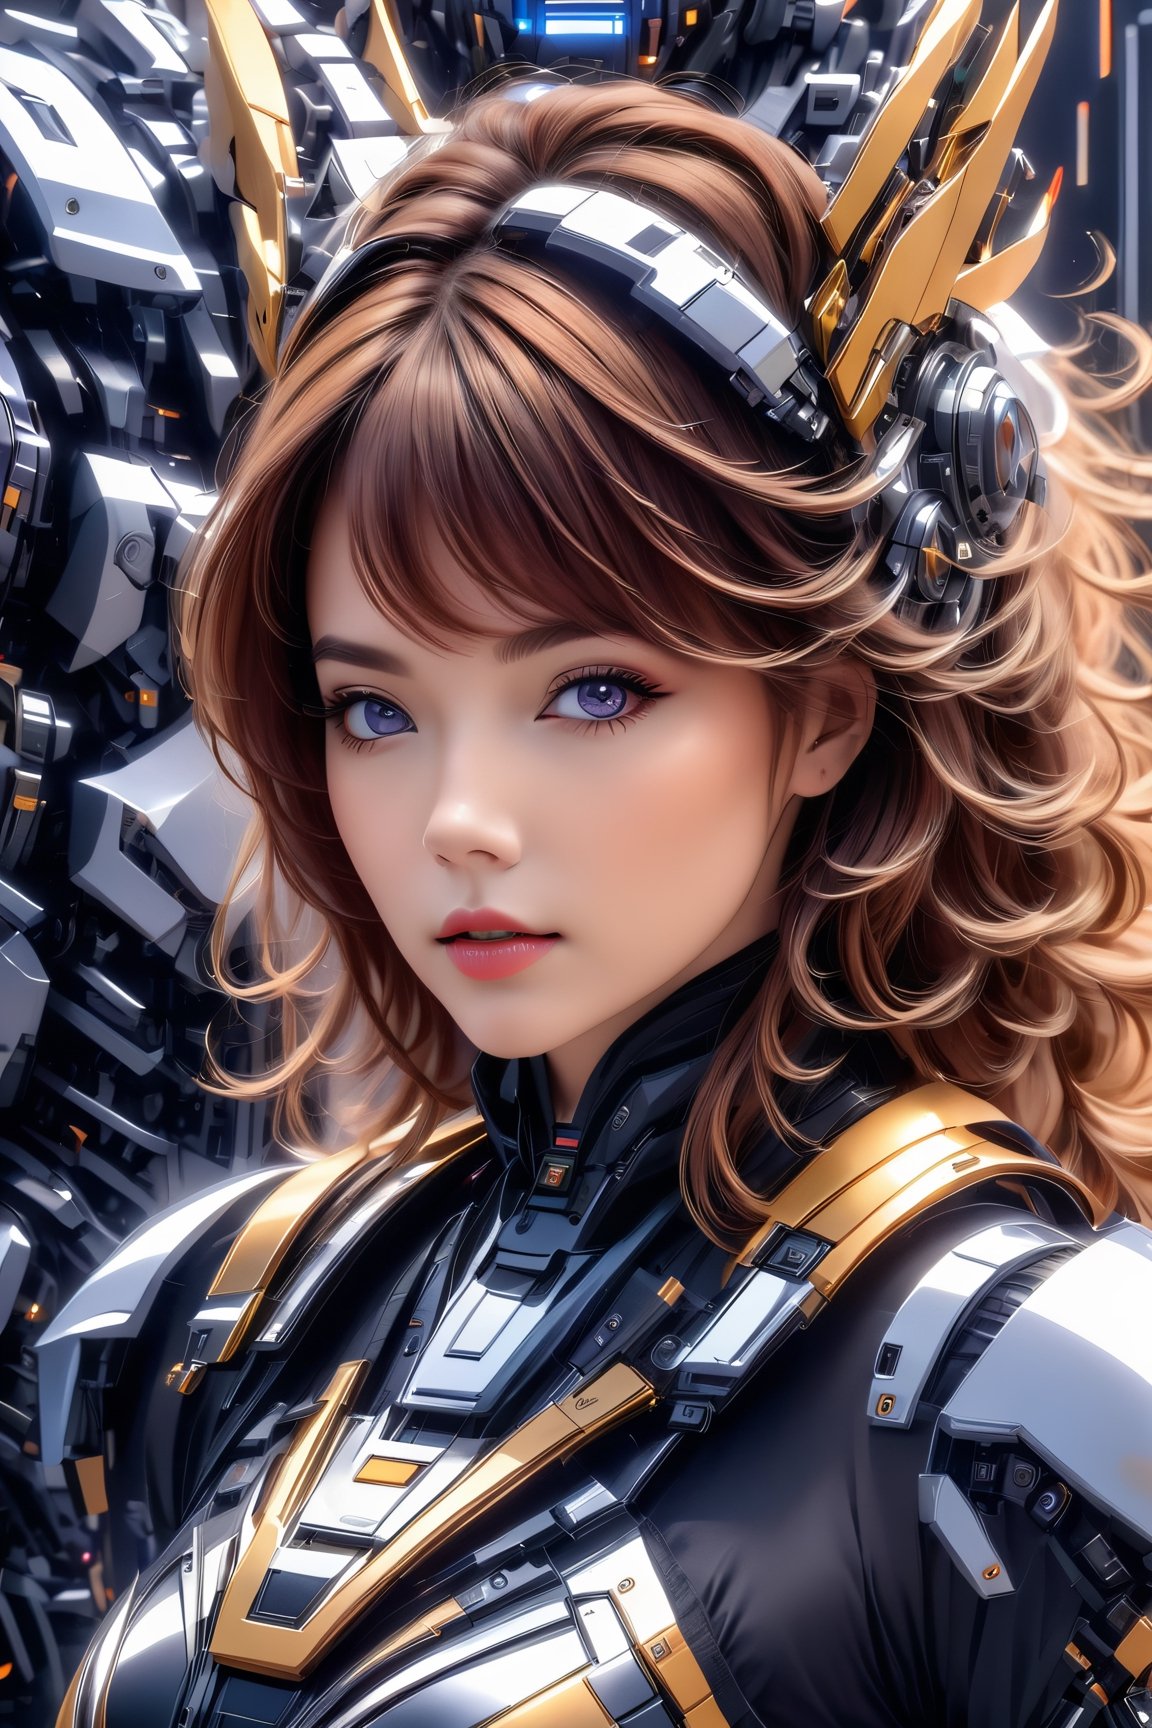 fierce beauty ((full body)), her brown hair with blonde highlights on her bangs cascading down the side of her face and shoulders, standing inside of a MECH suit, (masterpiece, top quality, best quality, official art, beautiful and aesthetic:1.2), (1girl), extreme detailed,(fractal art:1.3),colorful,highest detailed,zoomout,perfecteyes, random hairstyle
,alluring_lolita_girl,RedHoodWaifu,beautymix,futurecamisole,mecha,xxmix_girl,Movie Still,Film Still,Wearing edgTemptation,Cinematic,p3rfect boobs,skirtlift,cleavage,Cinematic Shot,Cinematic Lighting,aesthetic portrait,photo r3al,cyborg style,korean girl